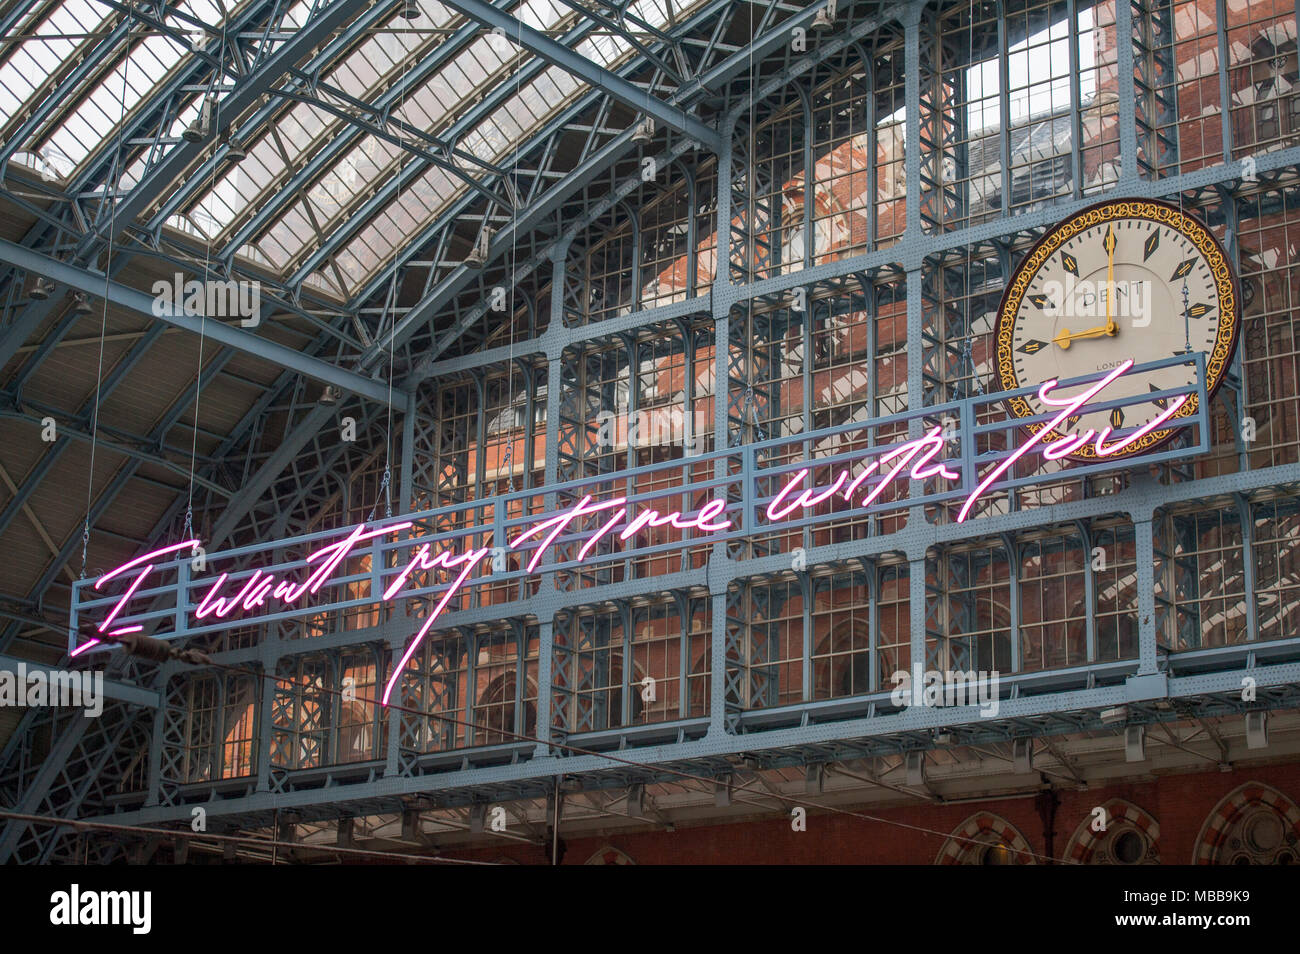 St Pancras station, London, UK. 10 April 2018. In celebration of the 150th anniversary of St Pancras International and the 250th anniversary of the RA, Tracey Emin CBE RA presents a free public Terrace Wires installation suspended from the station’s Victorian glass roof. The largest text piece she has ever made at 20 metres long reminds travellers to stop and take a moment in one of the UK’s busiest railway stations. I Want My Time With You hangs directly below the St Pancras clock. Credit: Malcolm Park/Alamy Live News. Stock Photo